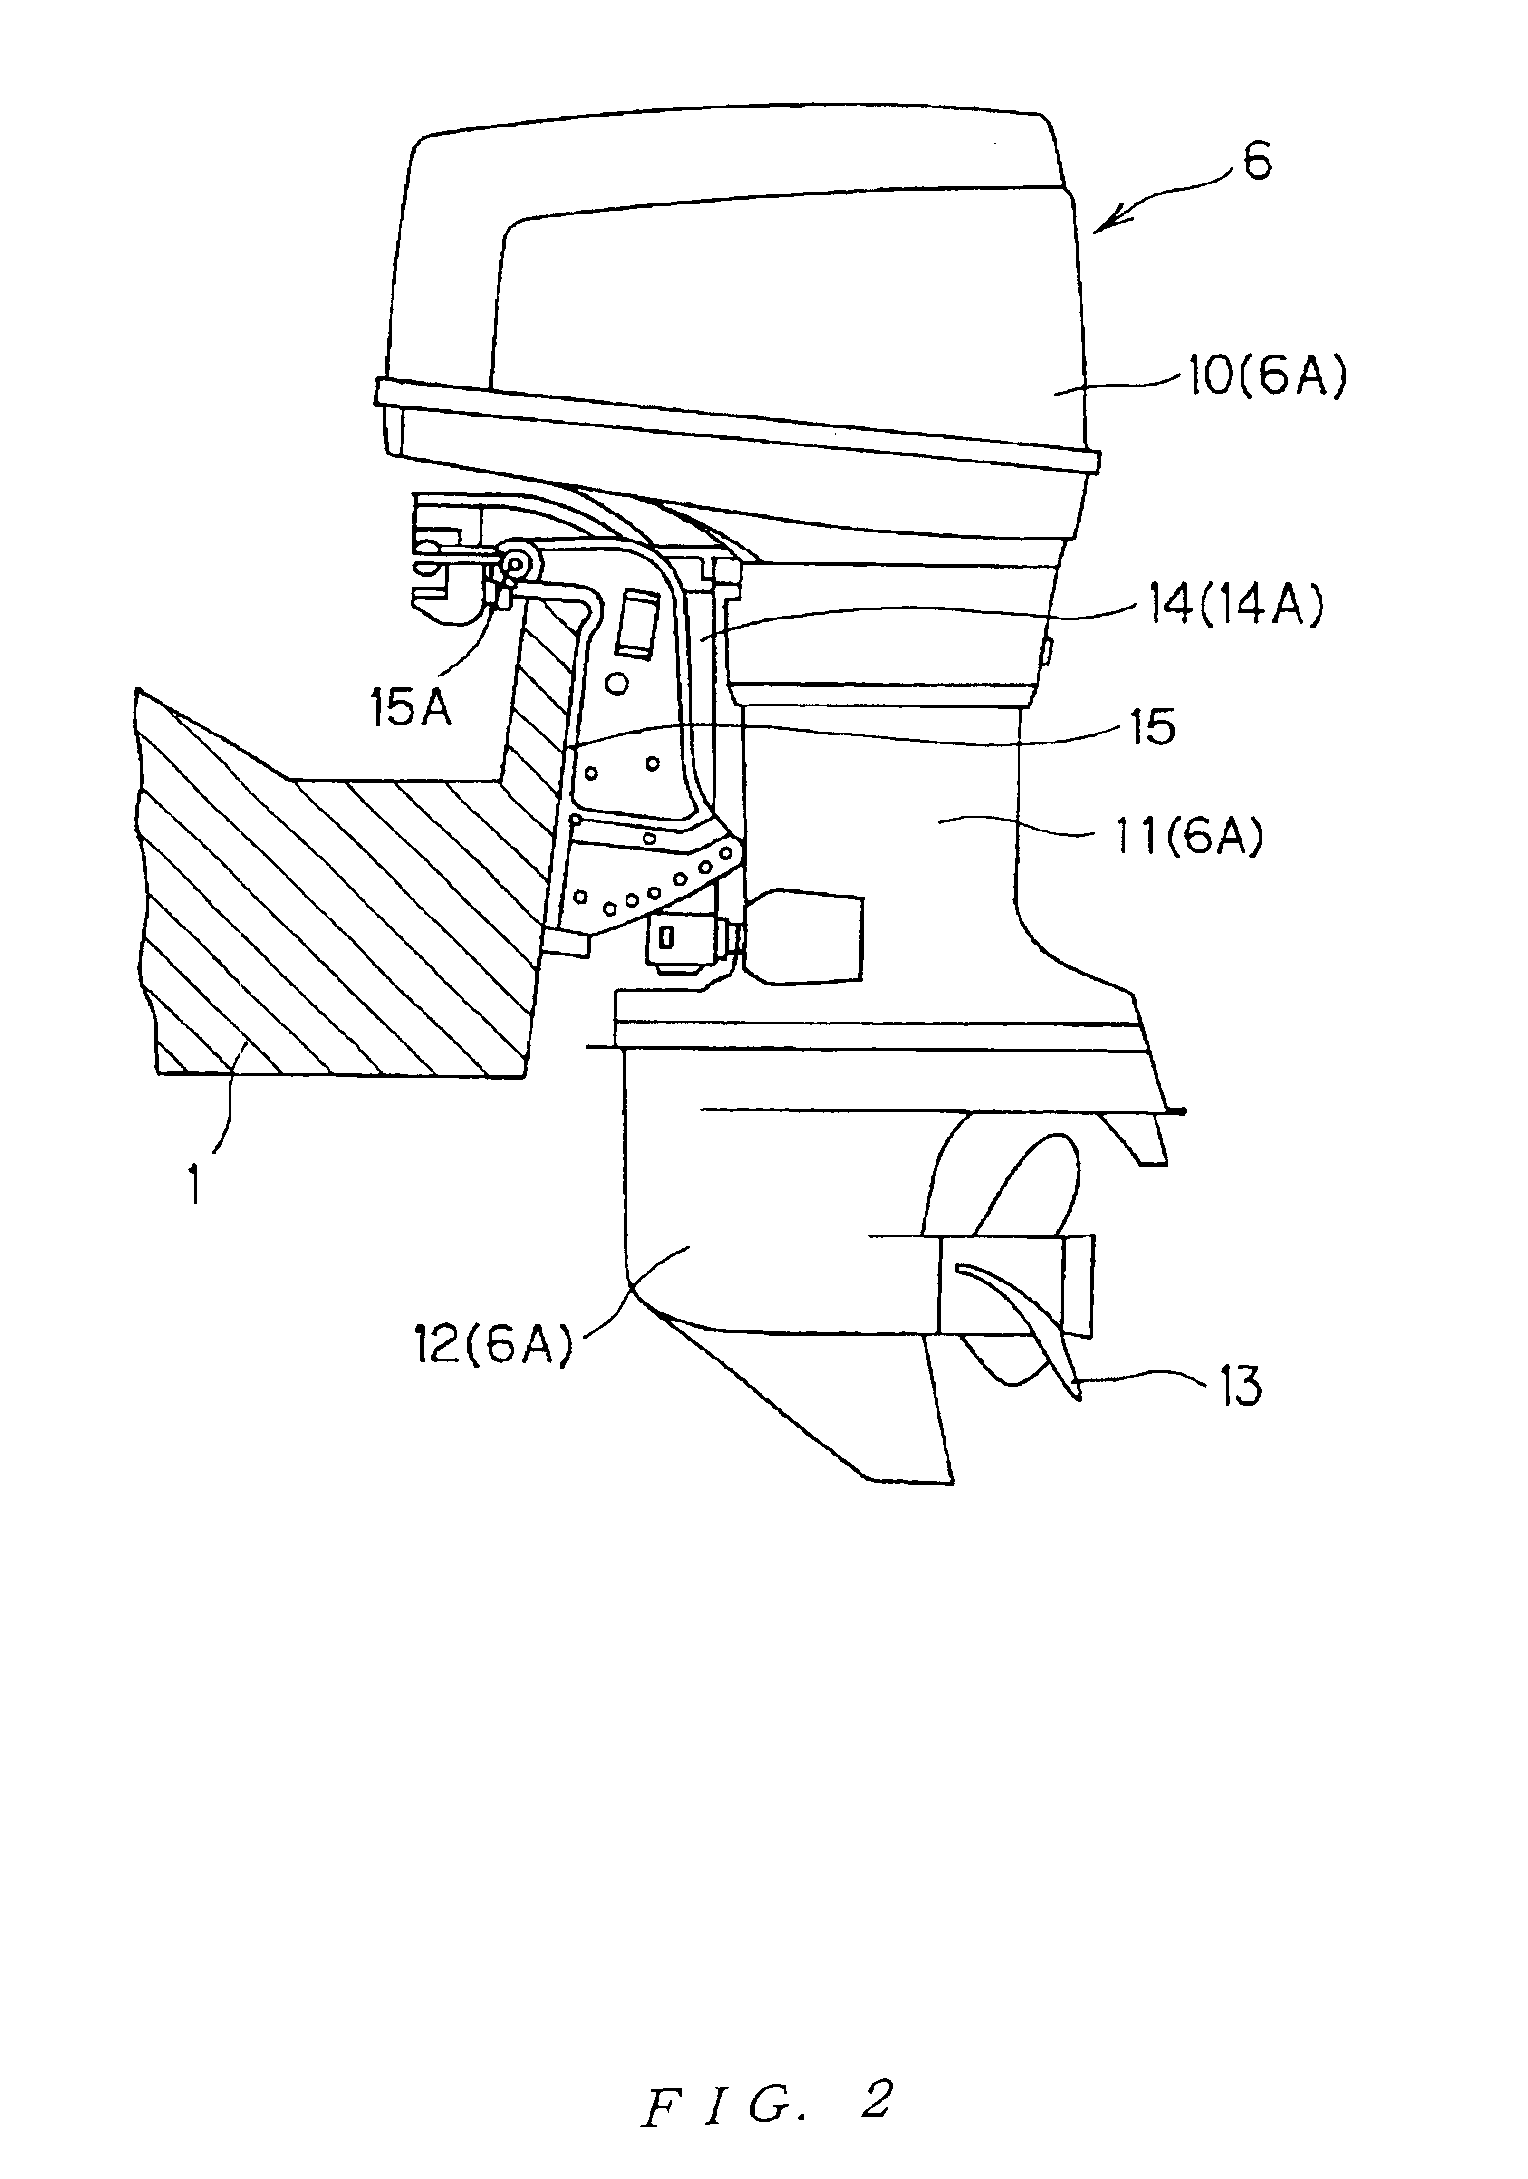 Power steering device for boat with outboard motor